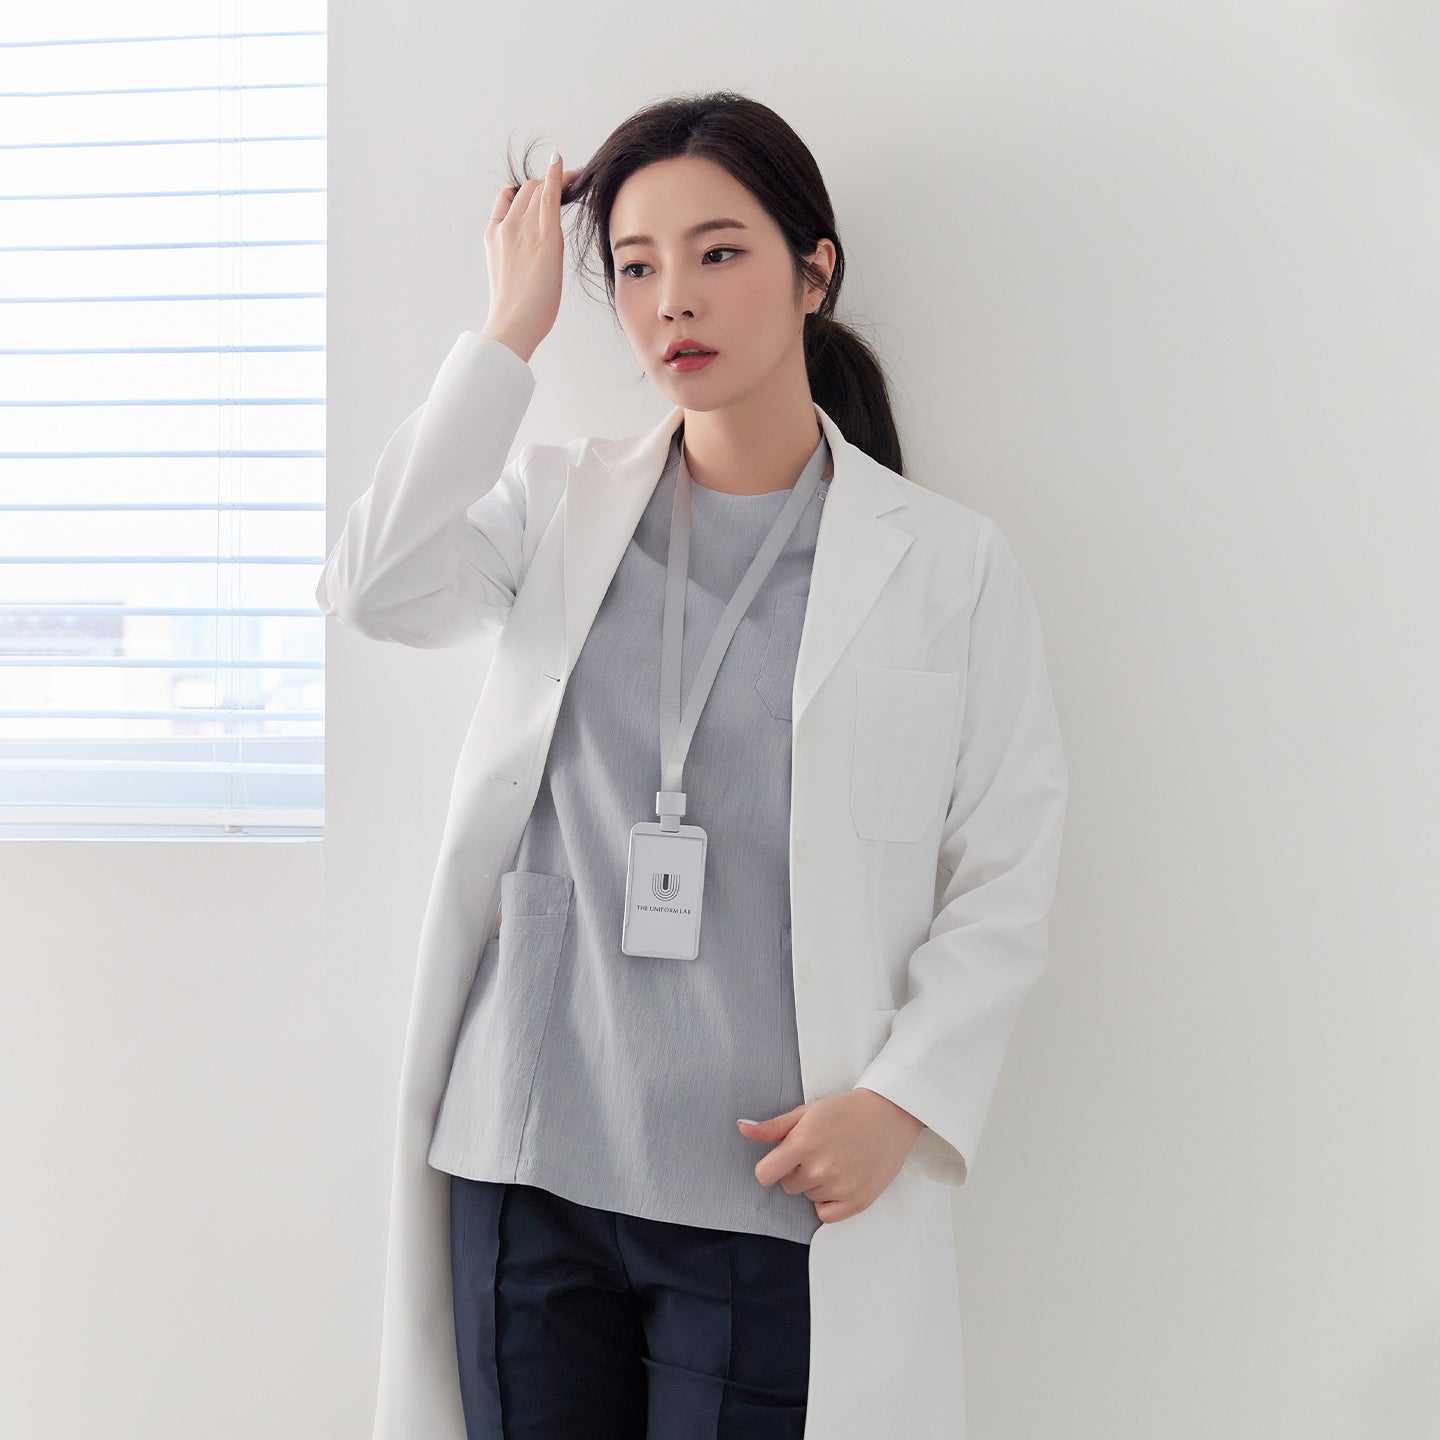 Woman wearing Zenir White Long Lab Coat LCW-04, standing in front of a window,White